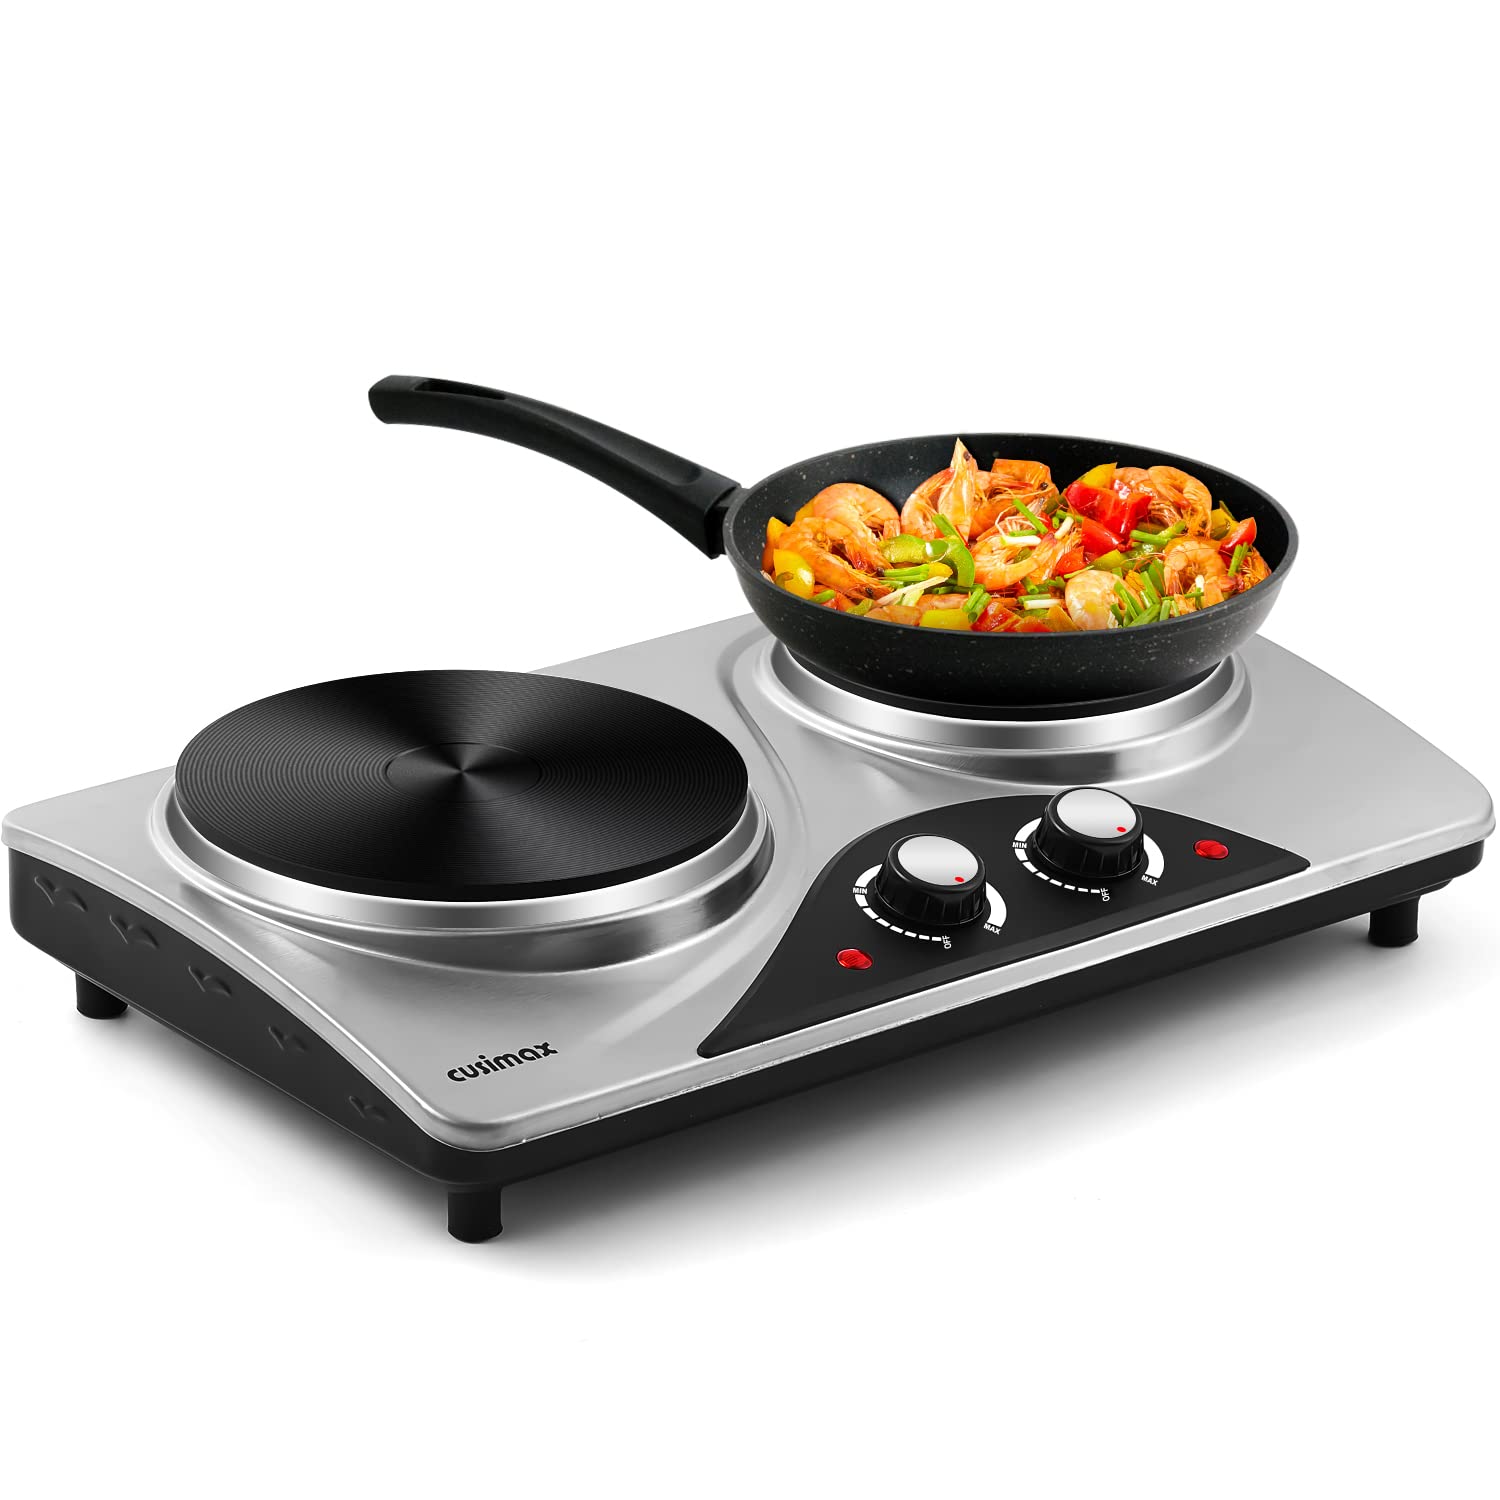 Cusimax 1800W Portable Electric Countertop Double Burner,Stainless Steel  Hot Plate Cooktop with 2 Knob Control,Cast Iron Electric Stove for